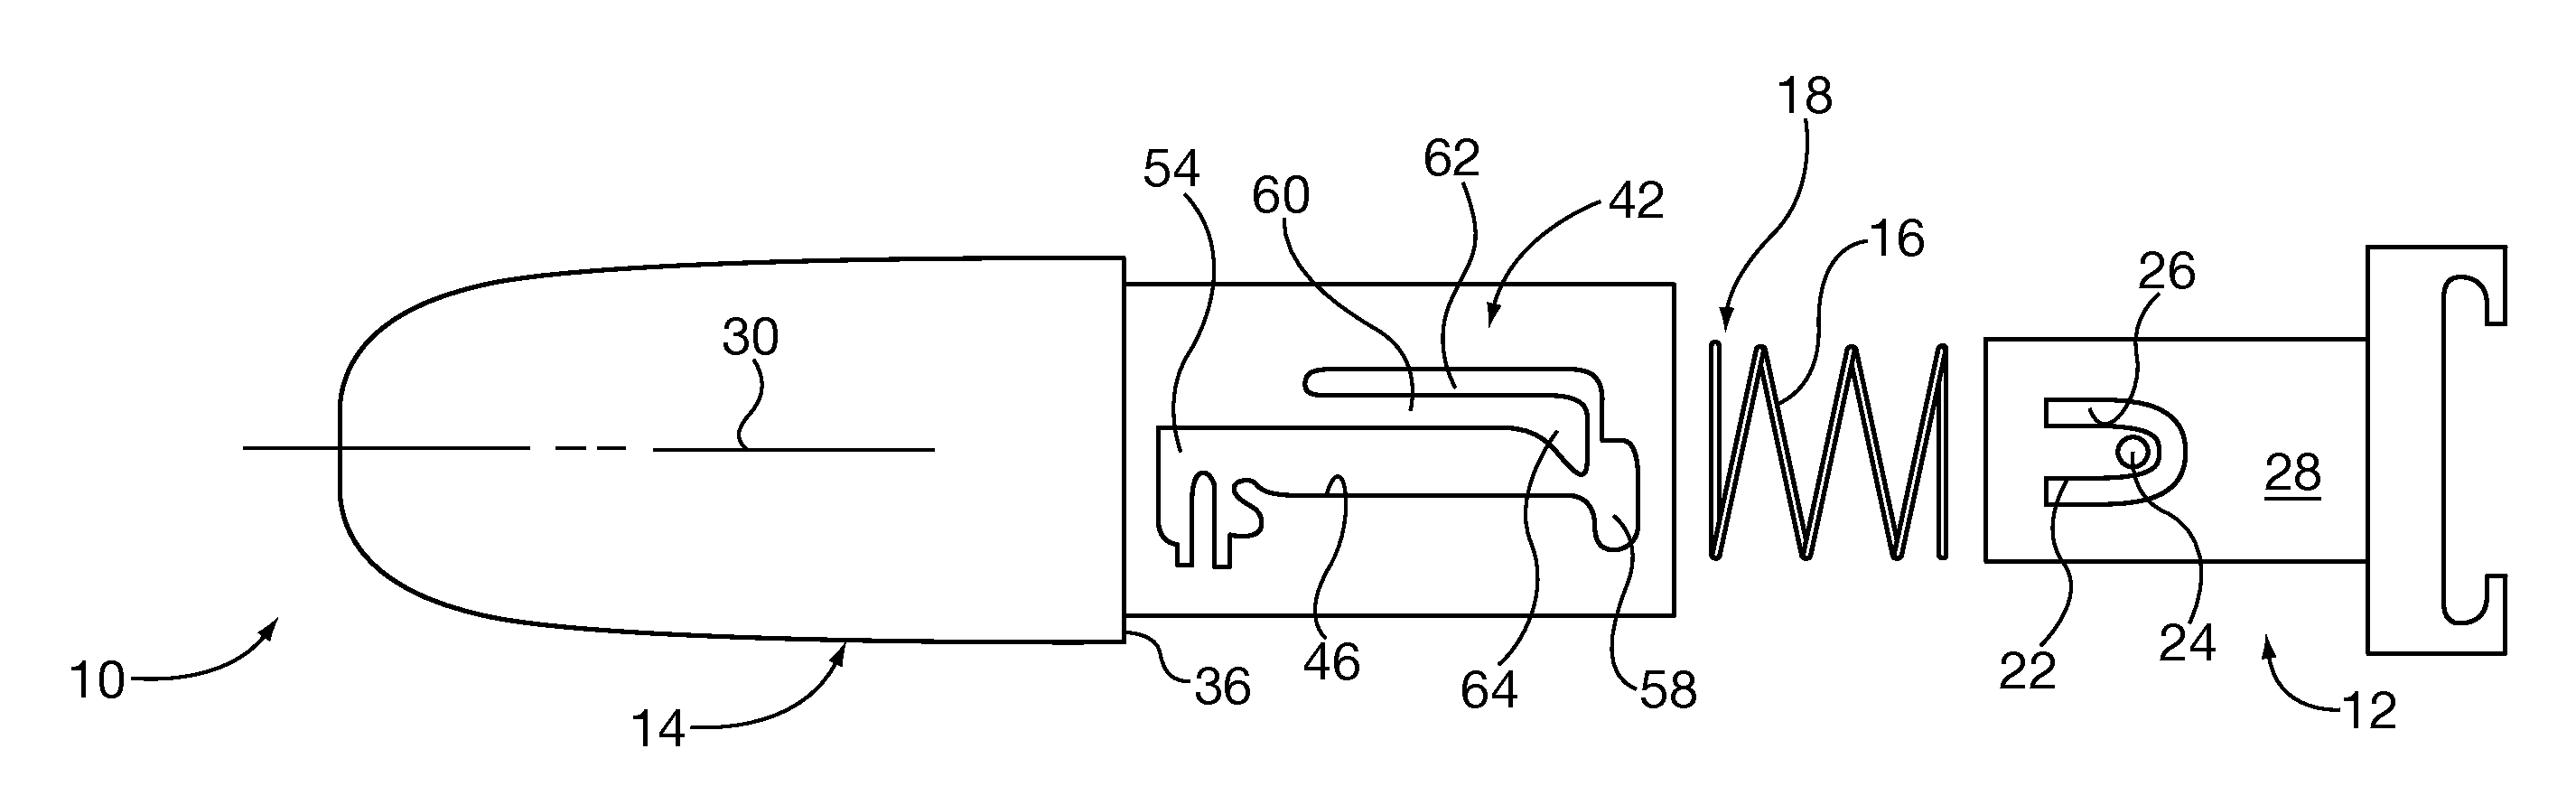 Protective guard for needles of injection devices having removable needle assemblies